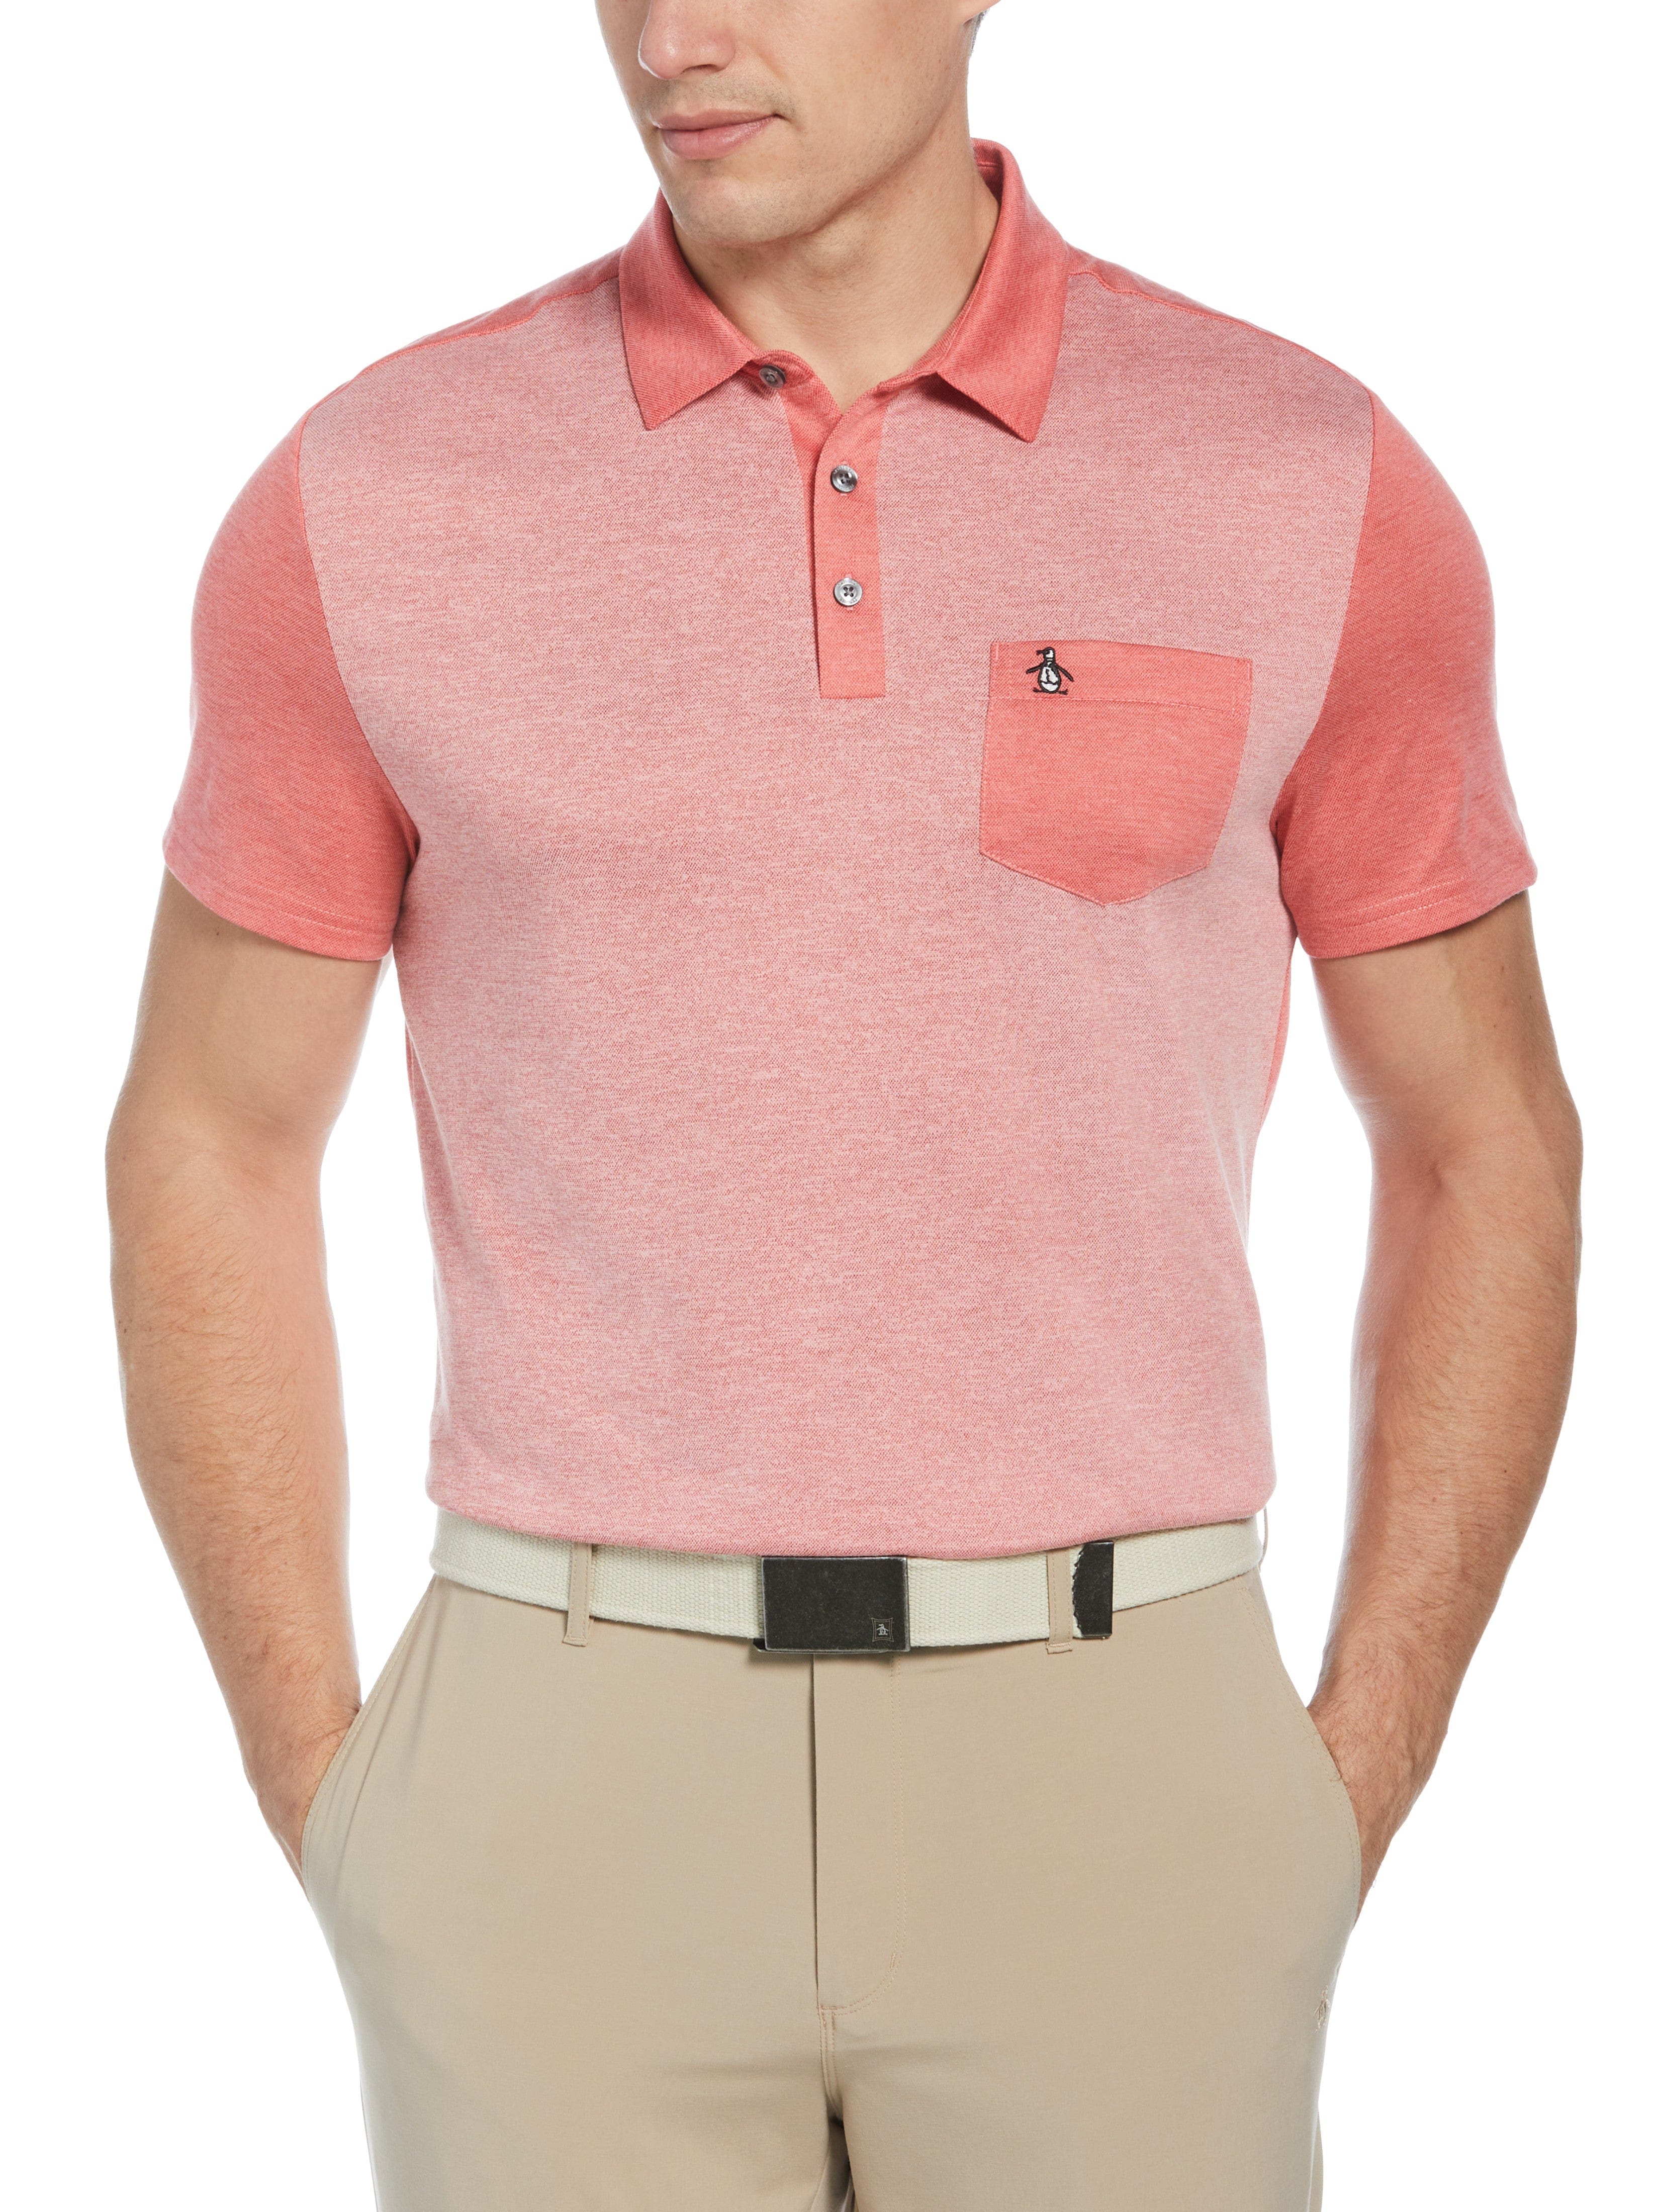 Original Penguin Mens Color Block Golf Polo Shirt, Size Large, Bittersweet Red, Polyester/Recycled Polyester/Cotton | Golf Apparel Shop